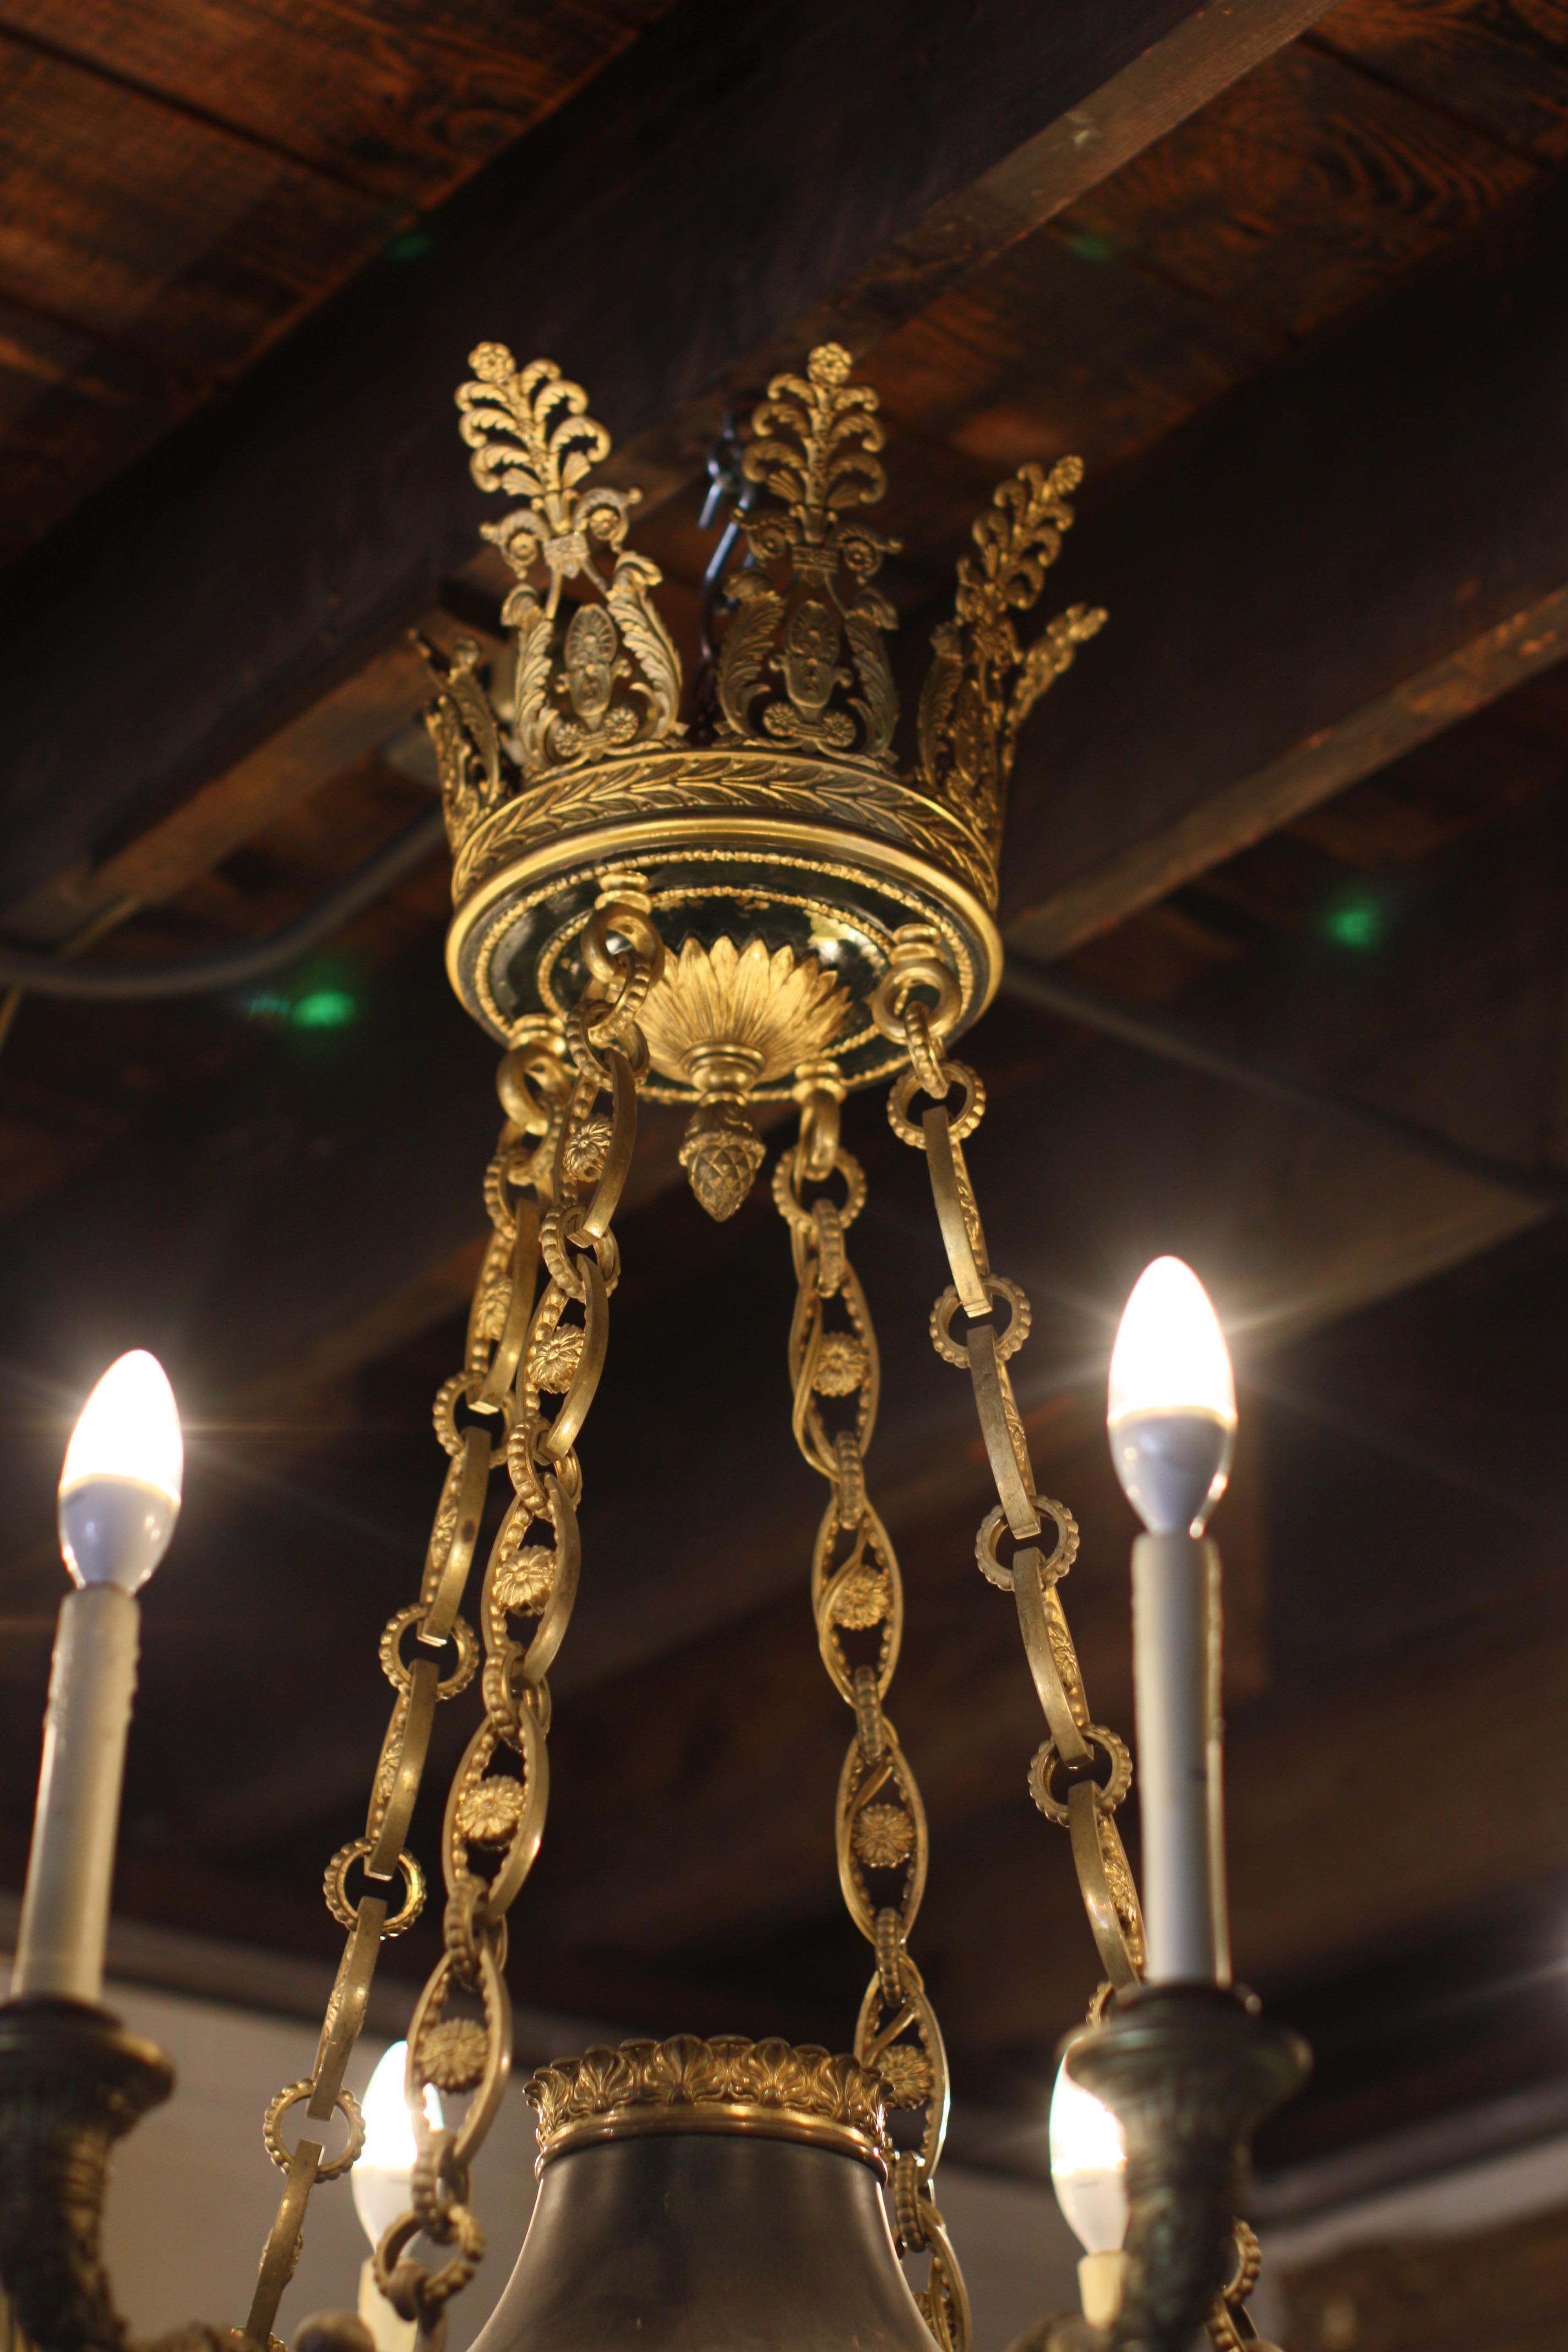 An Empire style very finely chased gilt-bronze and patinated bronze eight-light chandelier, French, circa 1880.
Measures: Height 46 in. (116.84 cm.), diameter 37 in. (93.98 cm.)